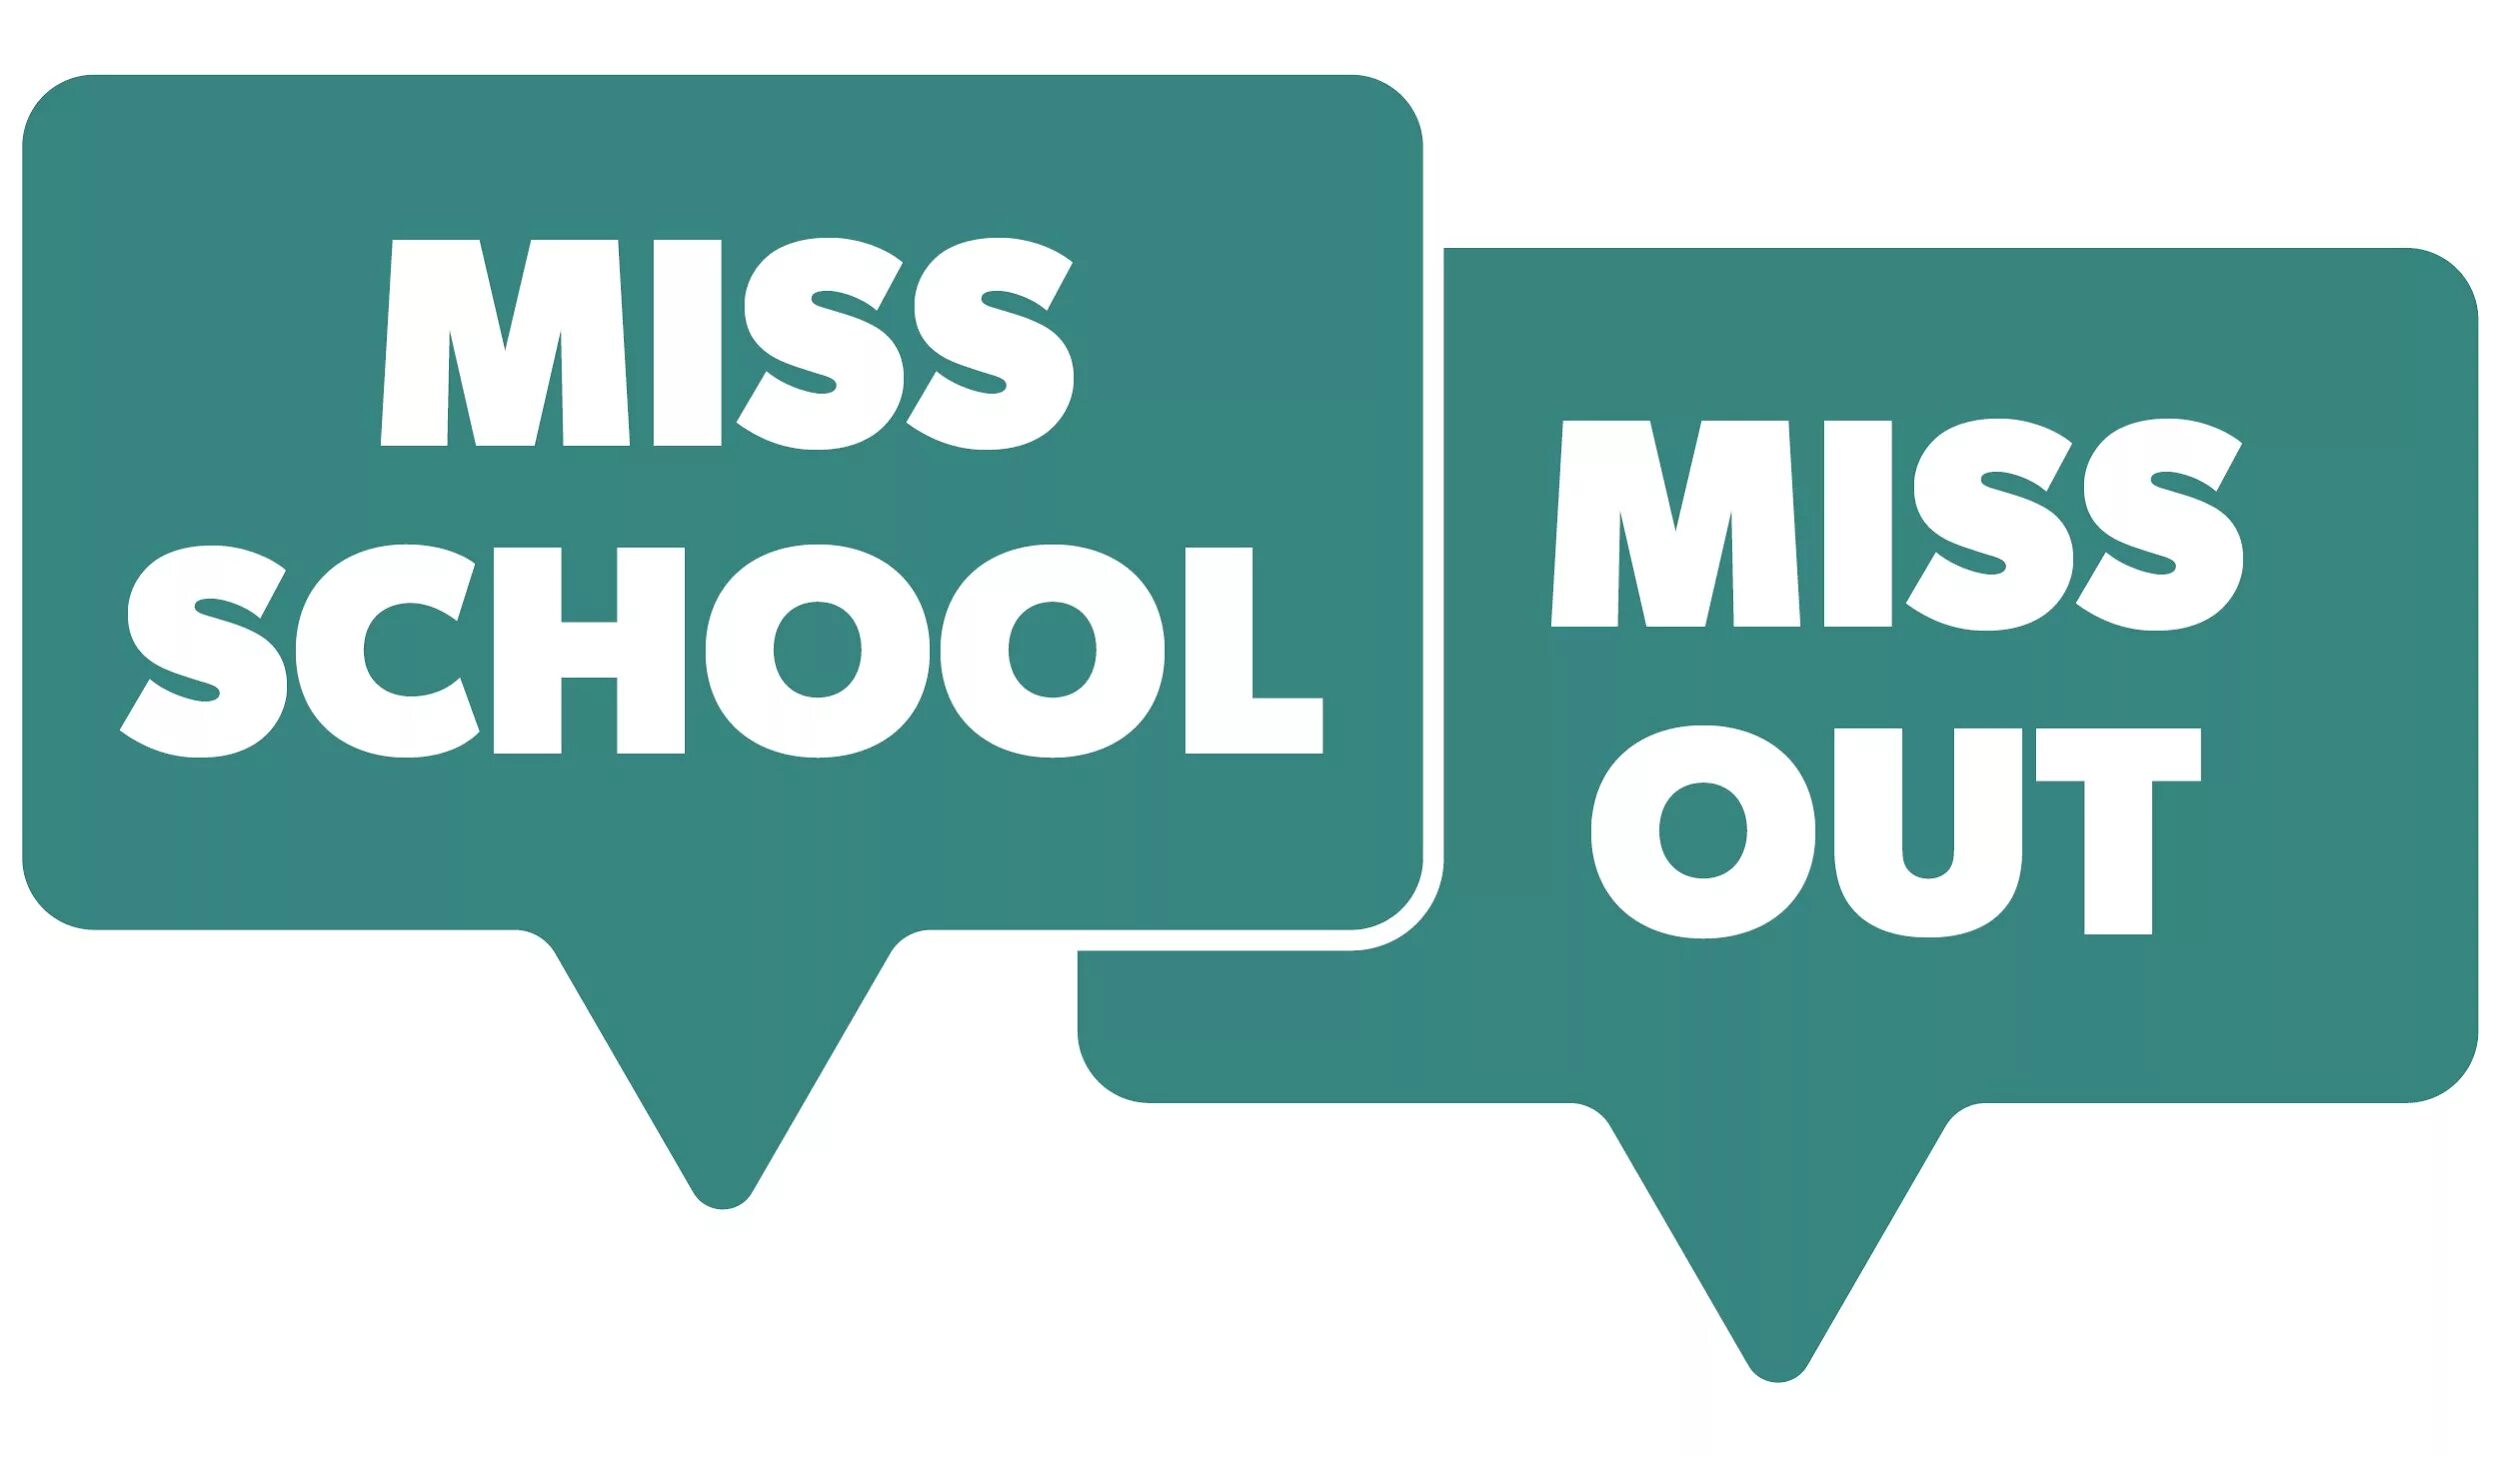 Miss School. Out logo. Did you Miss School. The School Missed you.